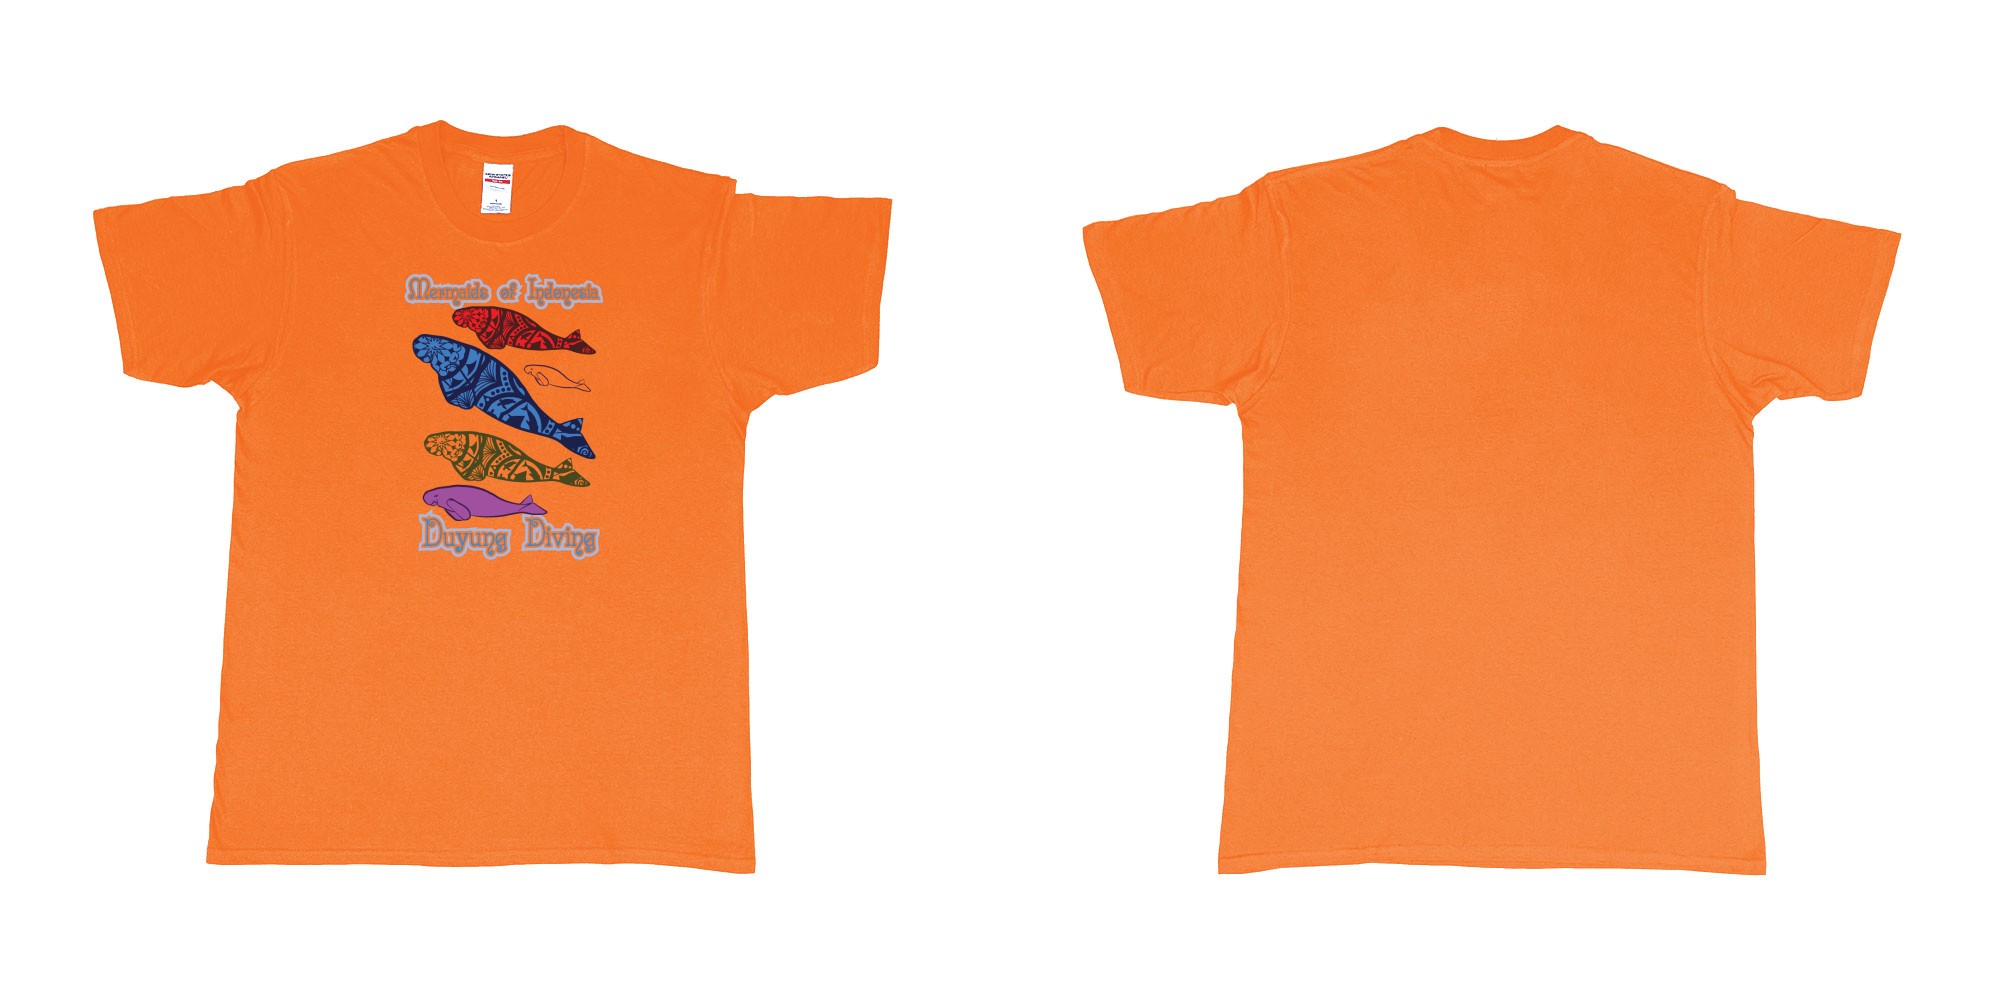 Custom tshirt design Mermaids of Indonesia Duyung Diving in fabric color orange choice your own text made in Bali by The Pirate Way